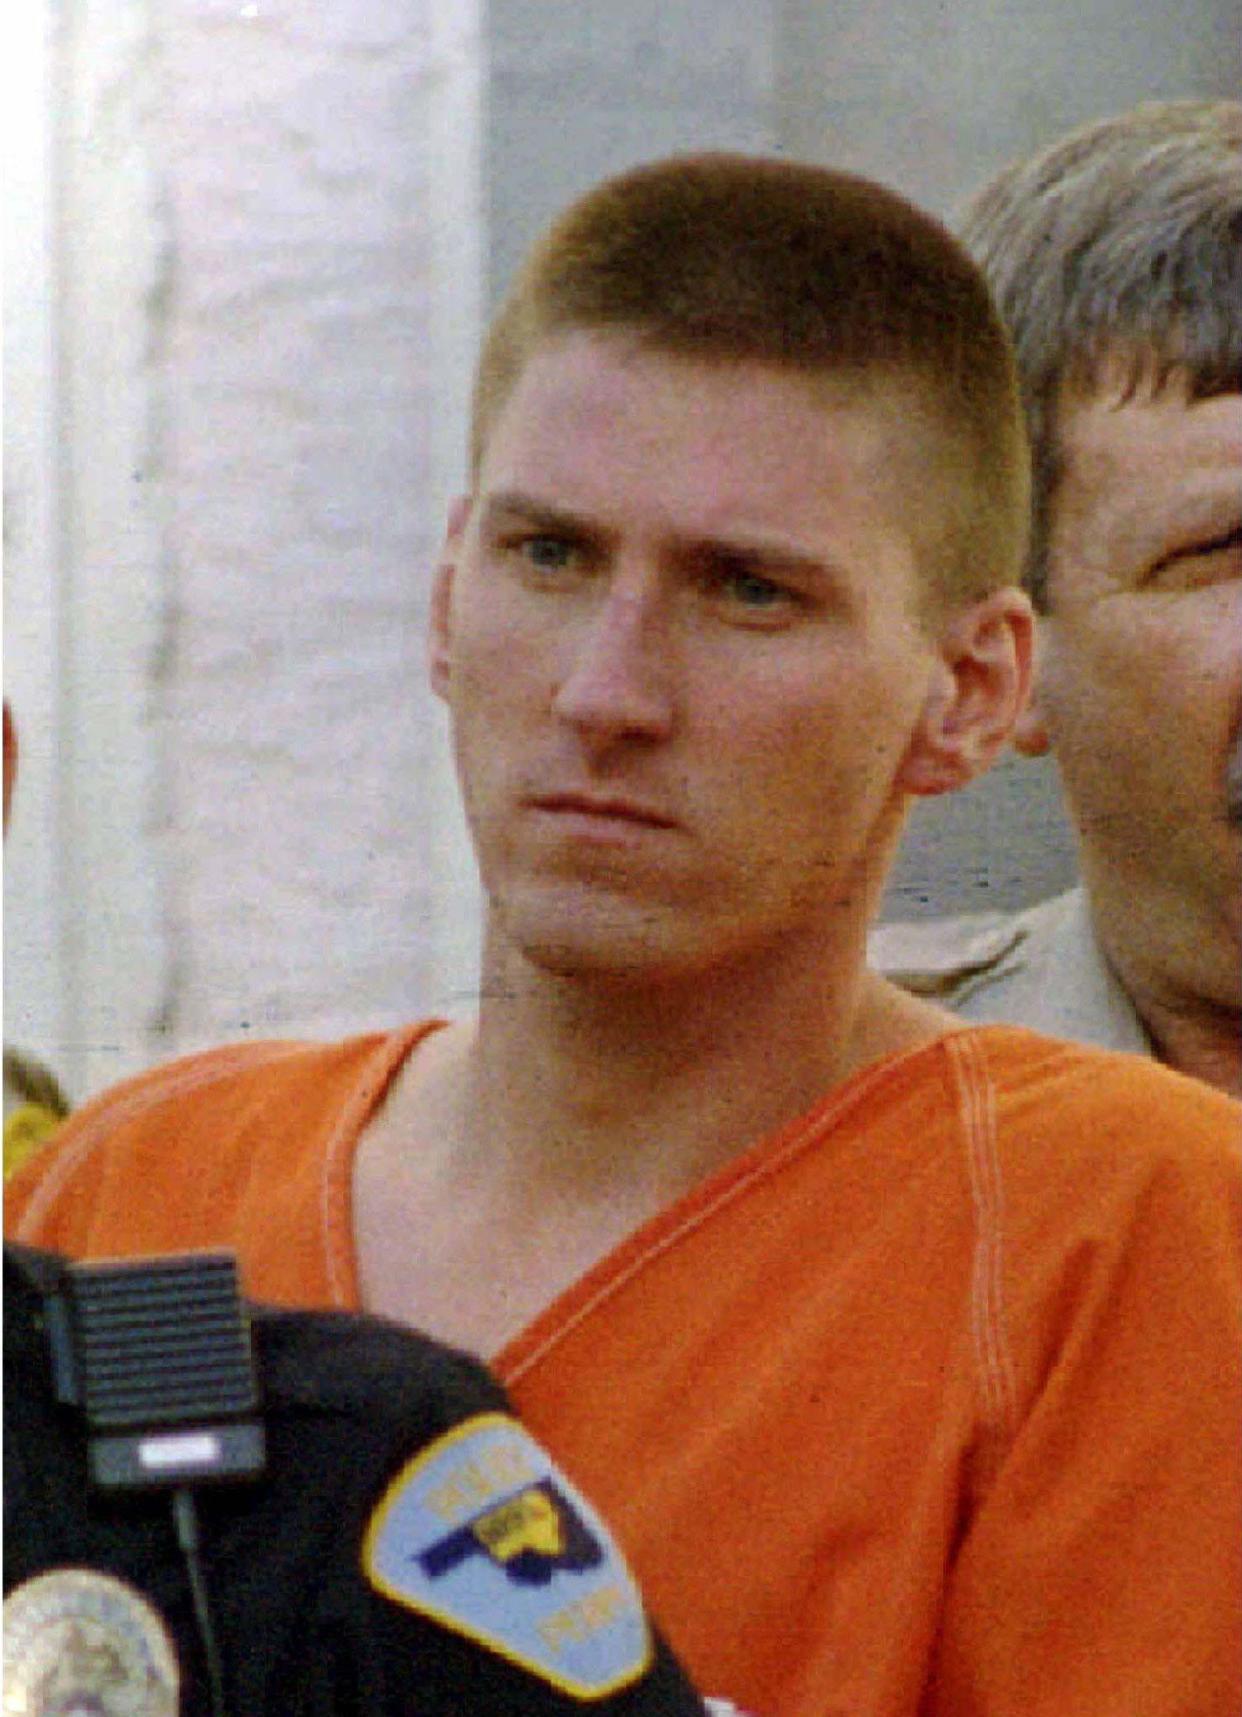 Oklahoma City bomber Timothy McVeigh is shown being escorted from the Noble County Courthouse as he is transported to Oklahoma City for arraignment in this April 22, 1995 file photo.